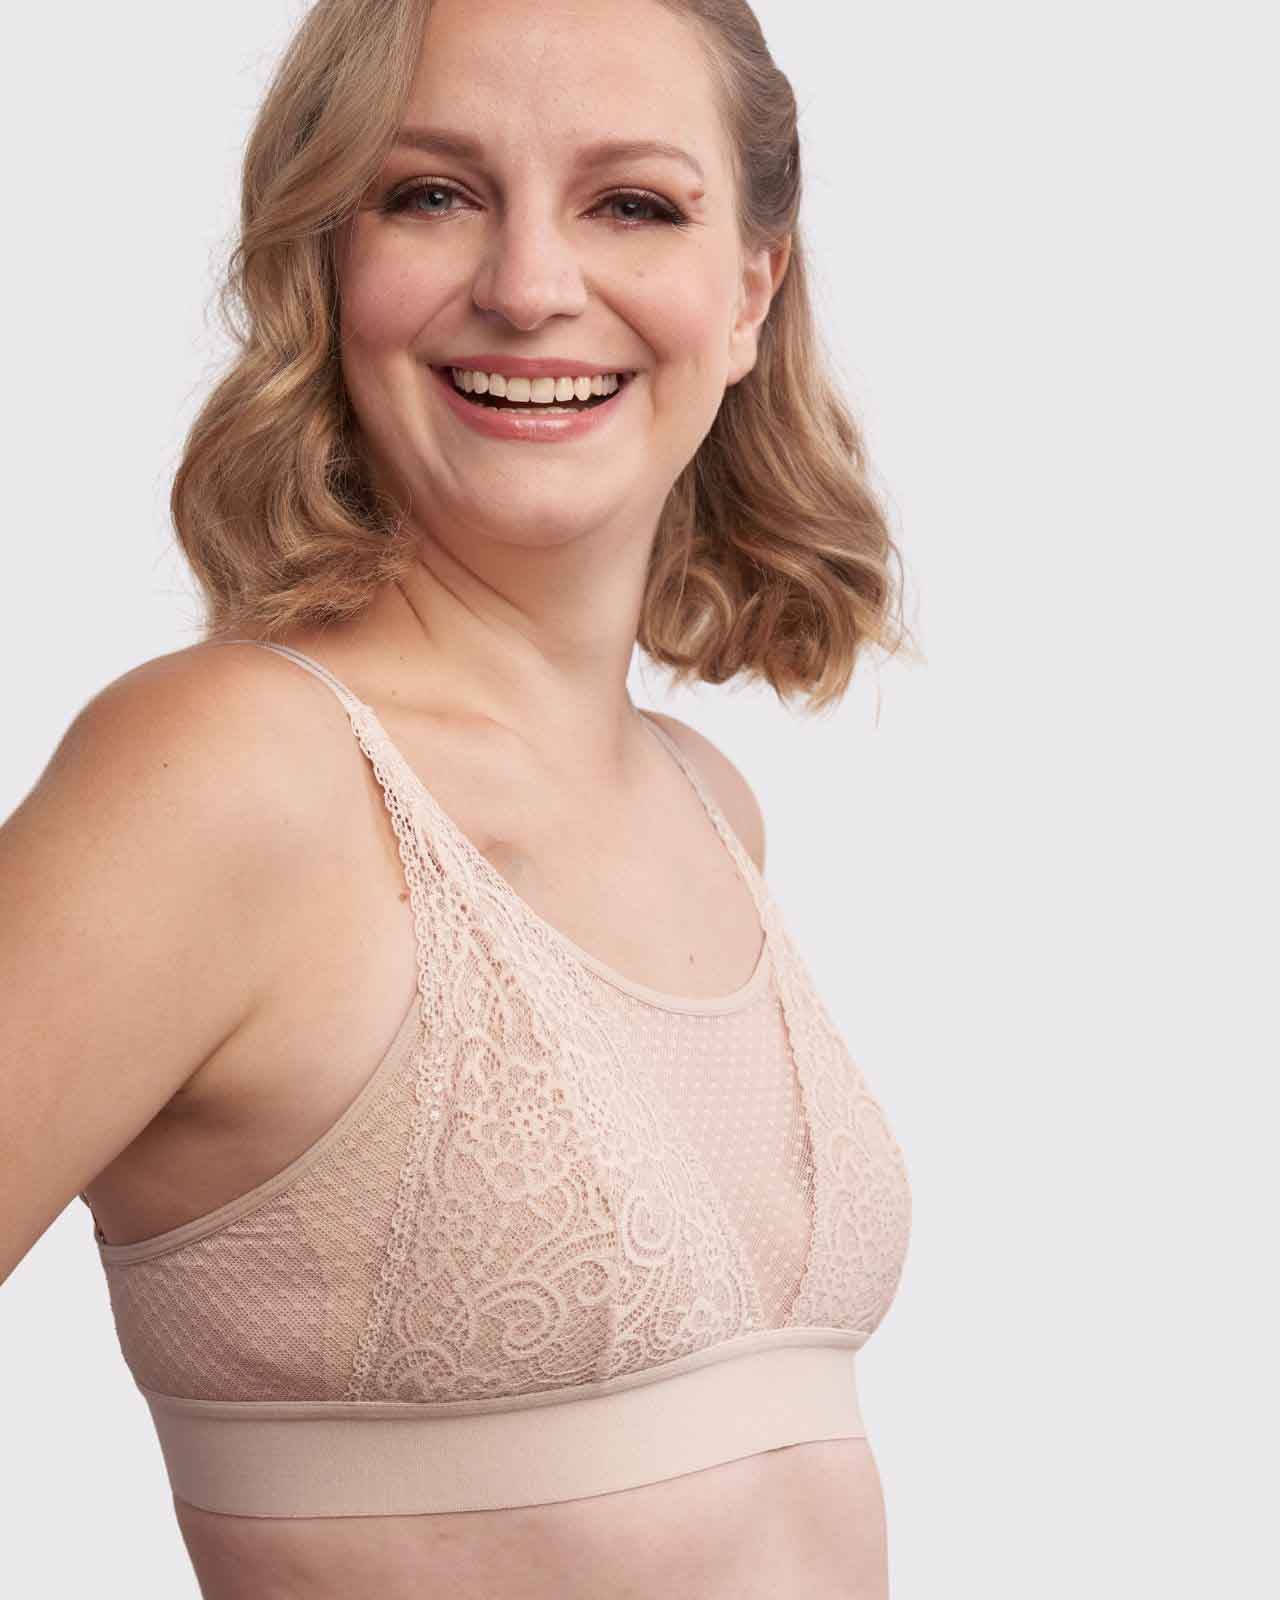 Romantic bra, straps over bust, lace embroidery